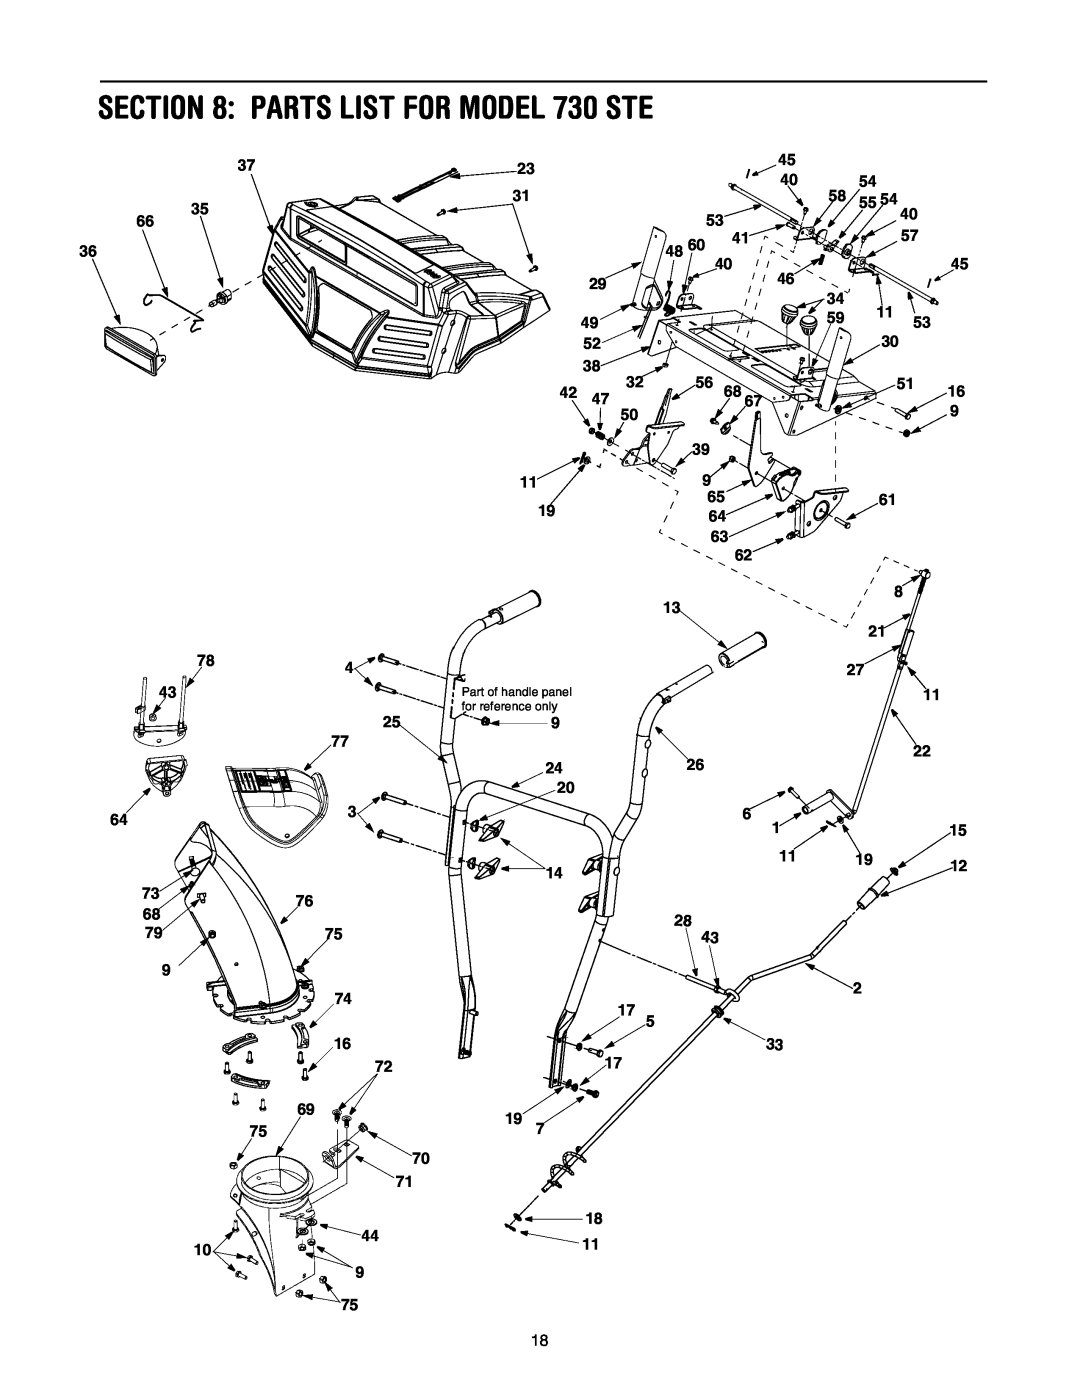 Cub Cadet manual PARTS LIST FOR MODEL 730 STE, Part of handle panel, for reference only 